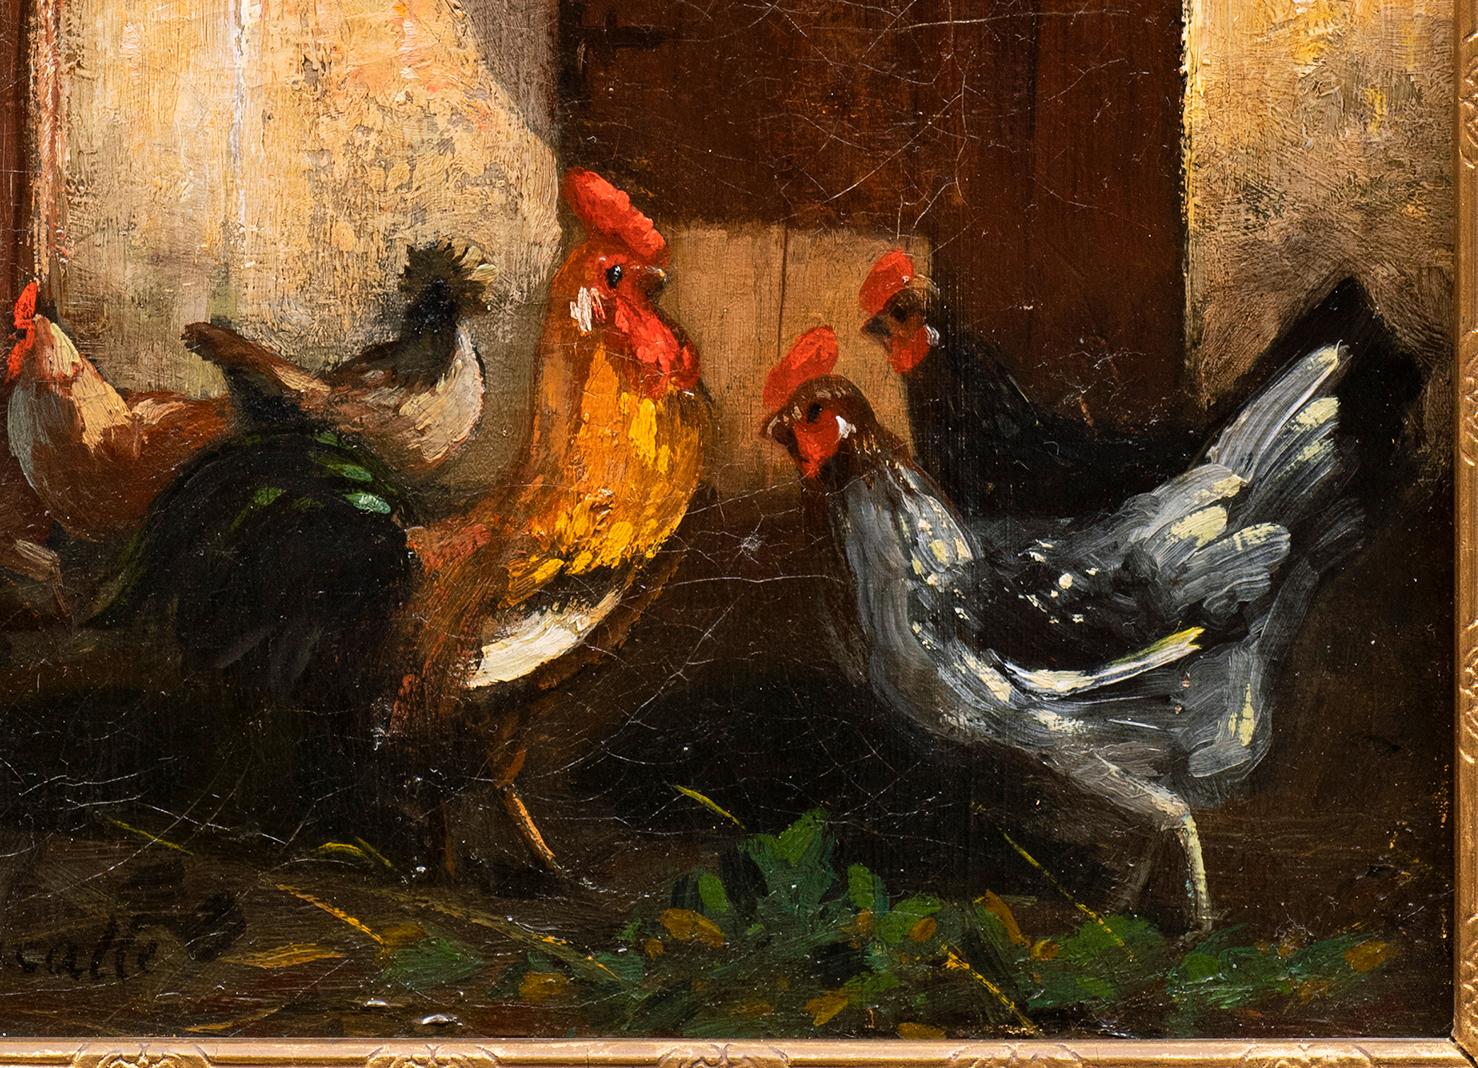 “A Rooster and Chickens in the Yard” Jacques Lacatte (France, 19th century) - Brown Landscape Painting by Unknown